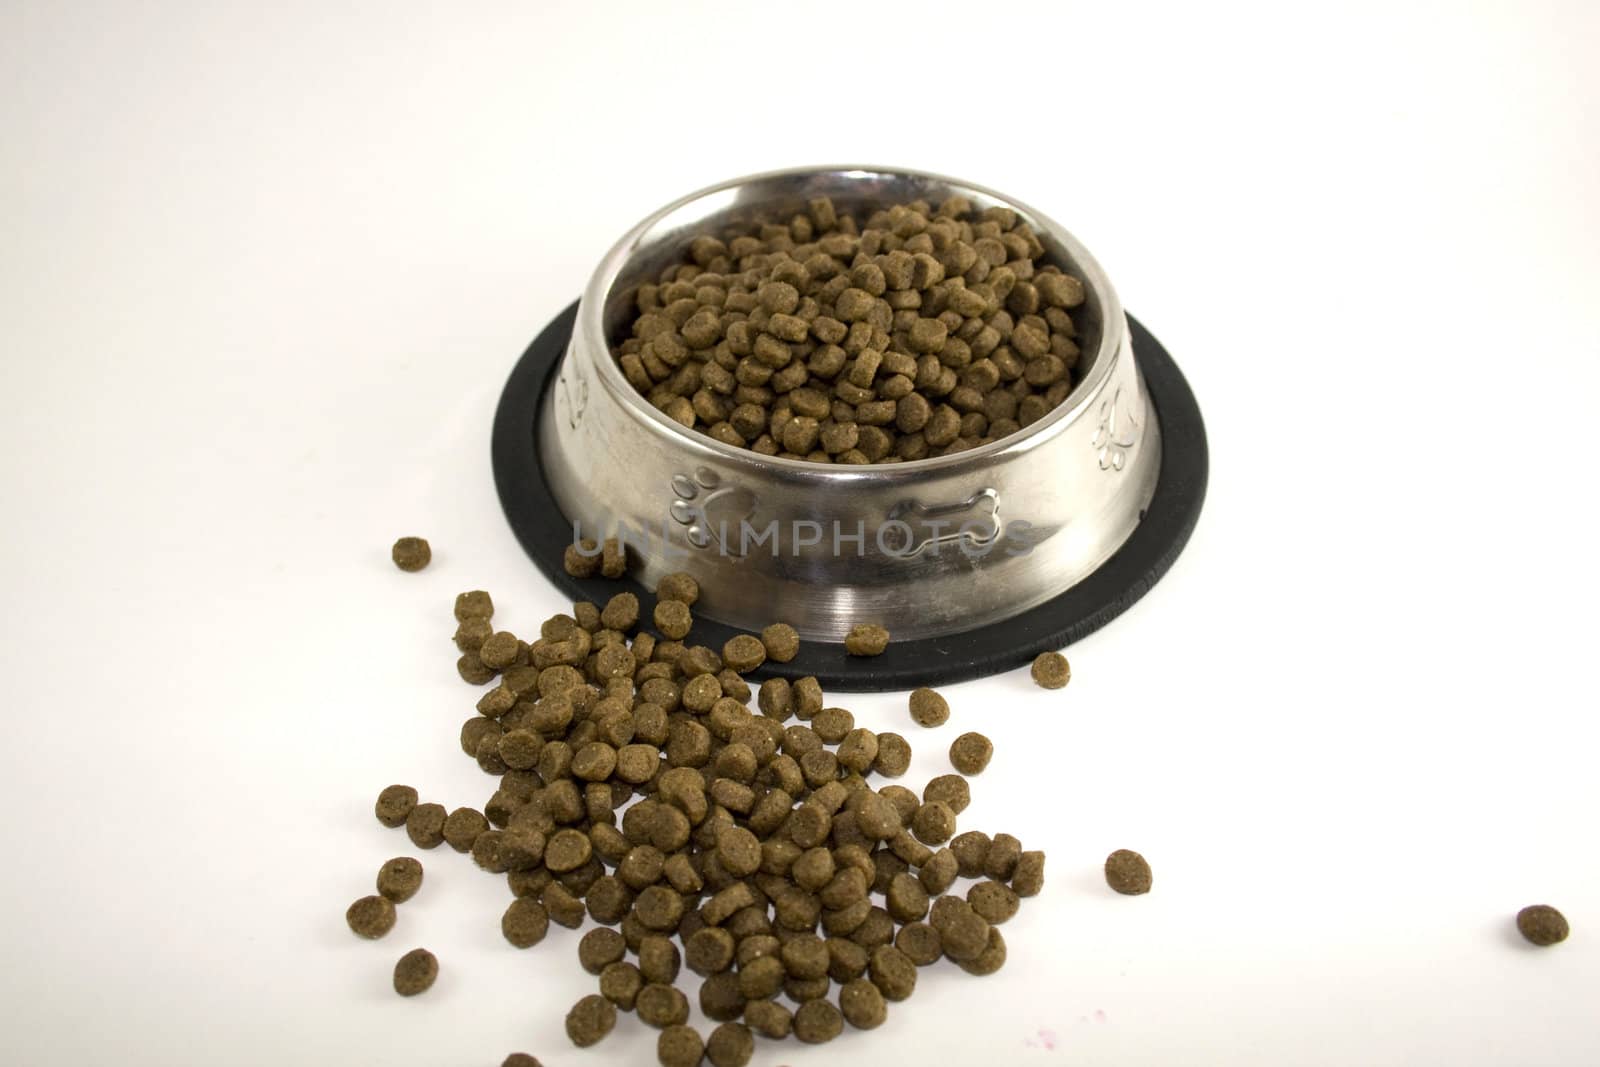 Dog Food in Bowl on white background